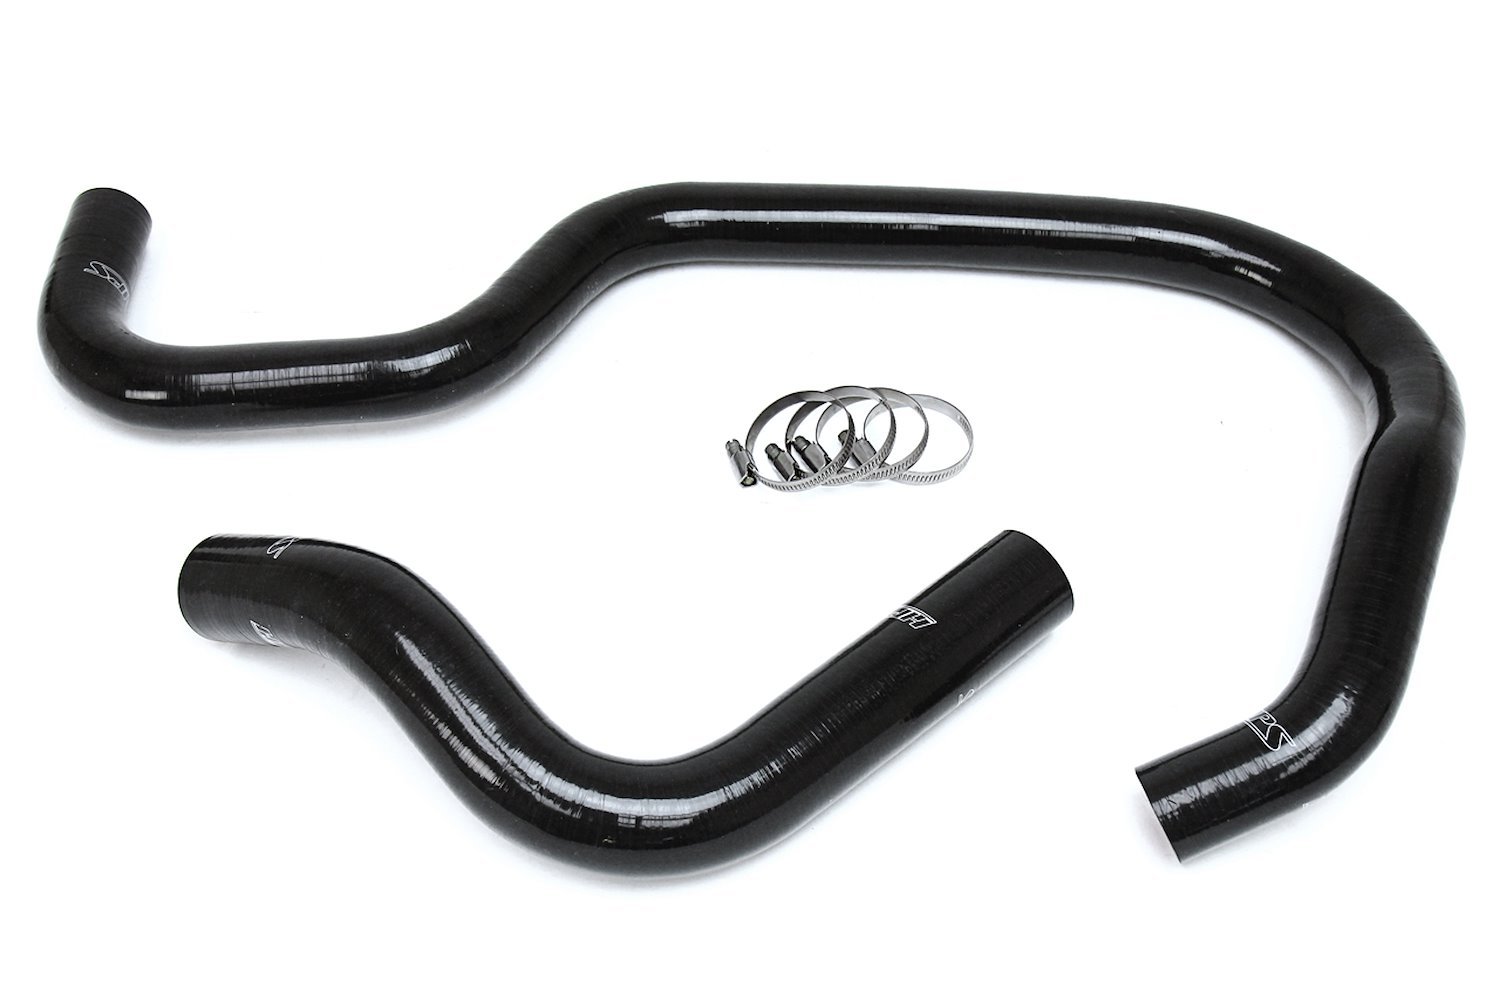 57-1686R-BLK Radiator Hose Kit, High-Temp 3-Ply Reinforced Silicone, Replace OEM Rubber Radiator Coolant Hoses